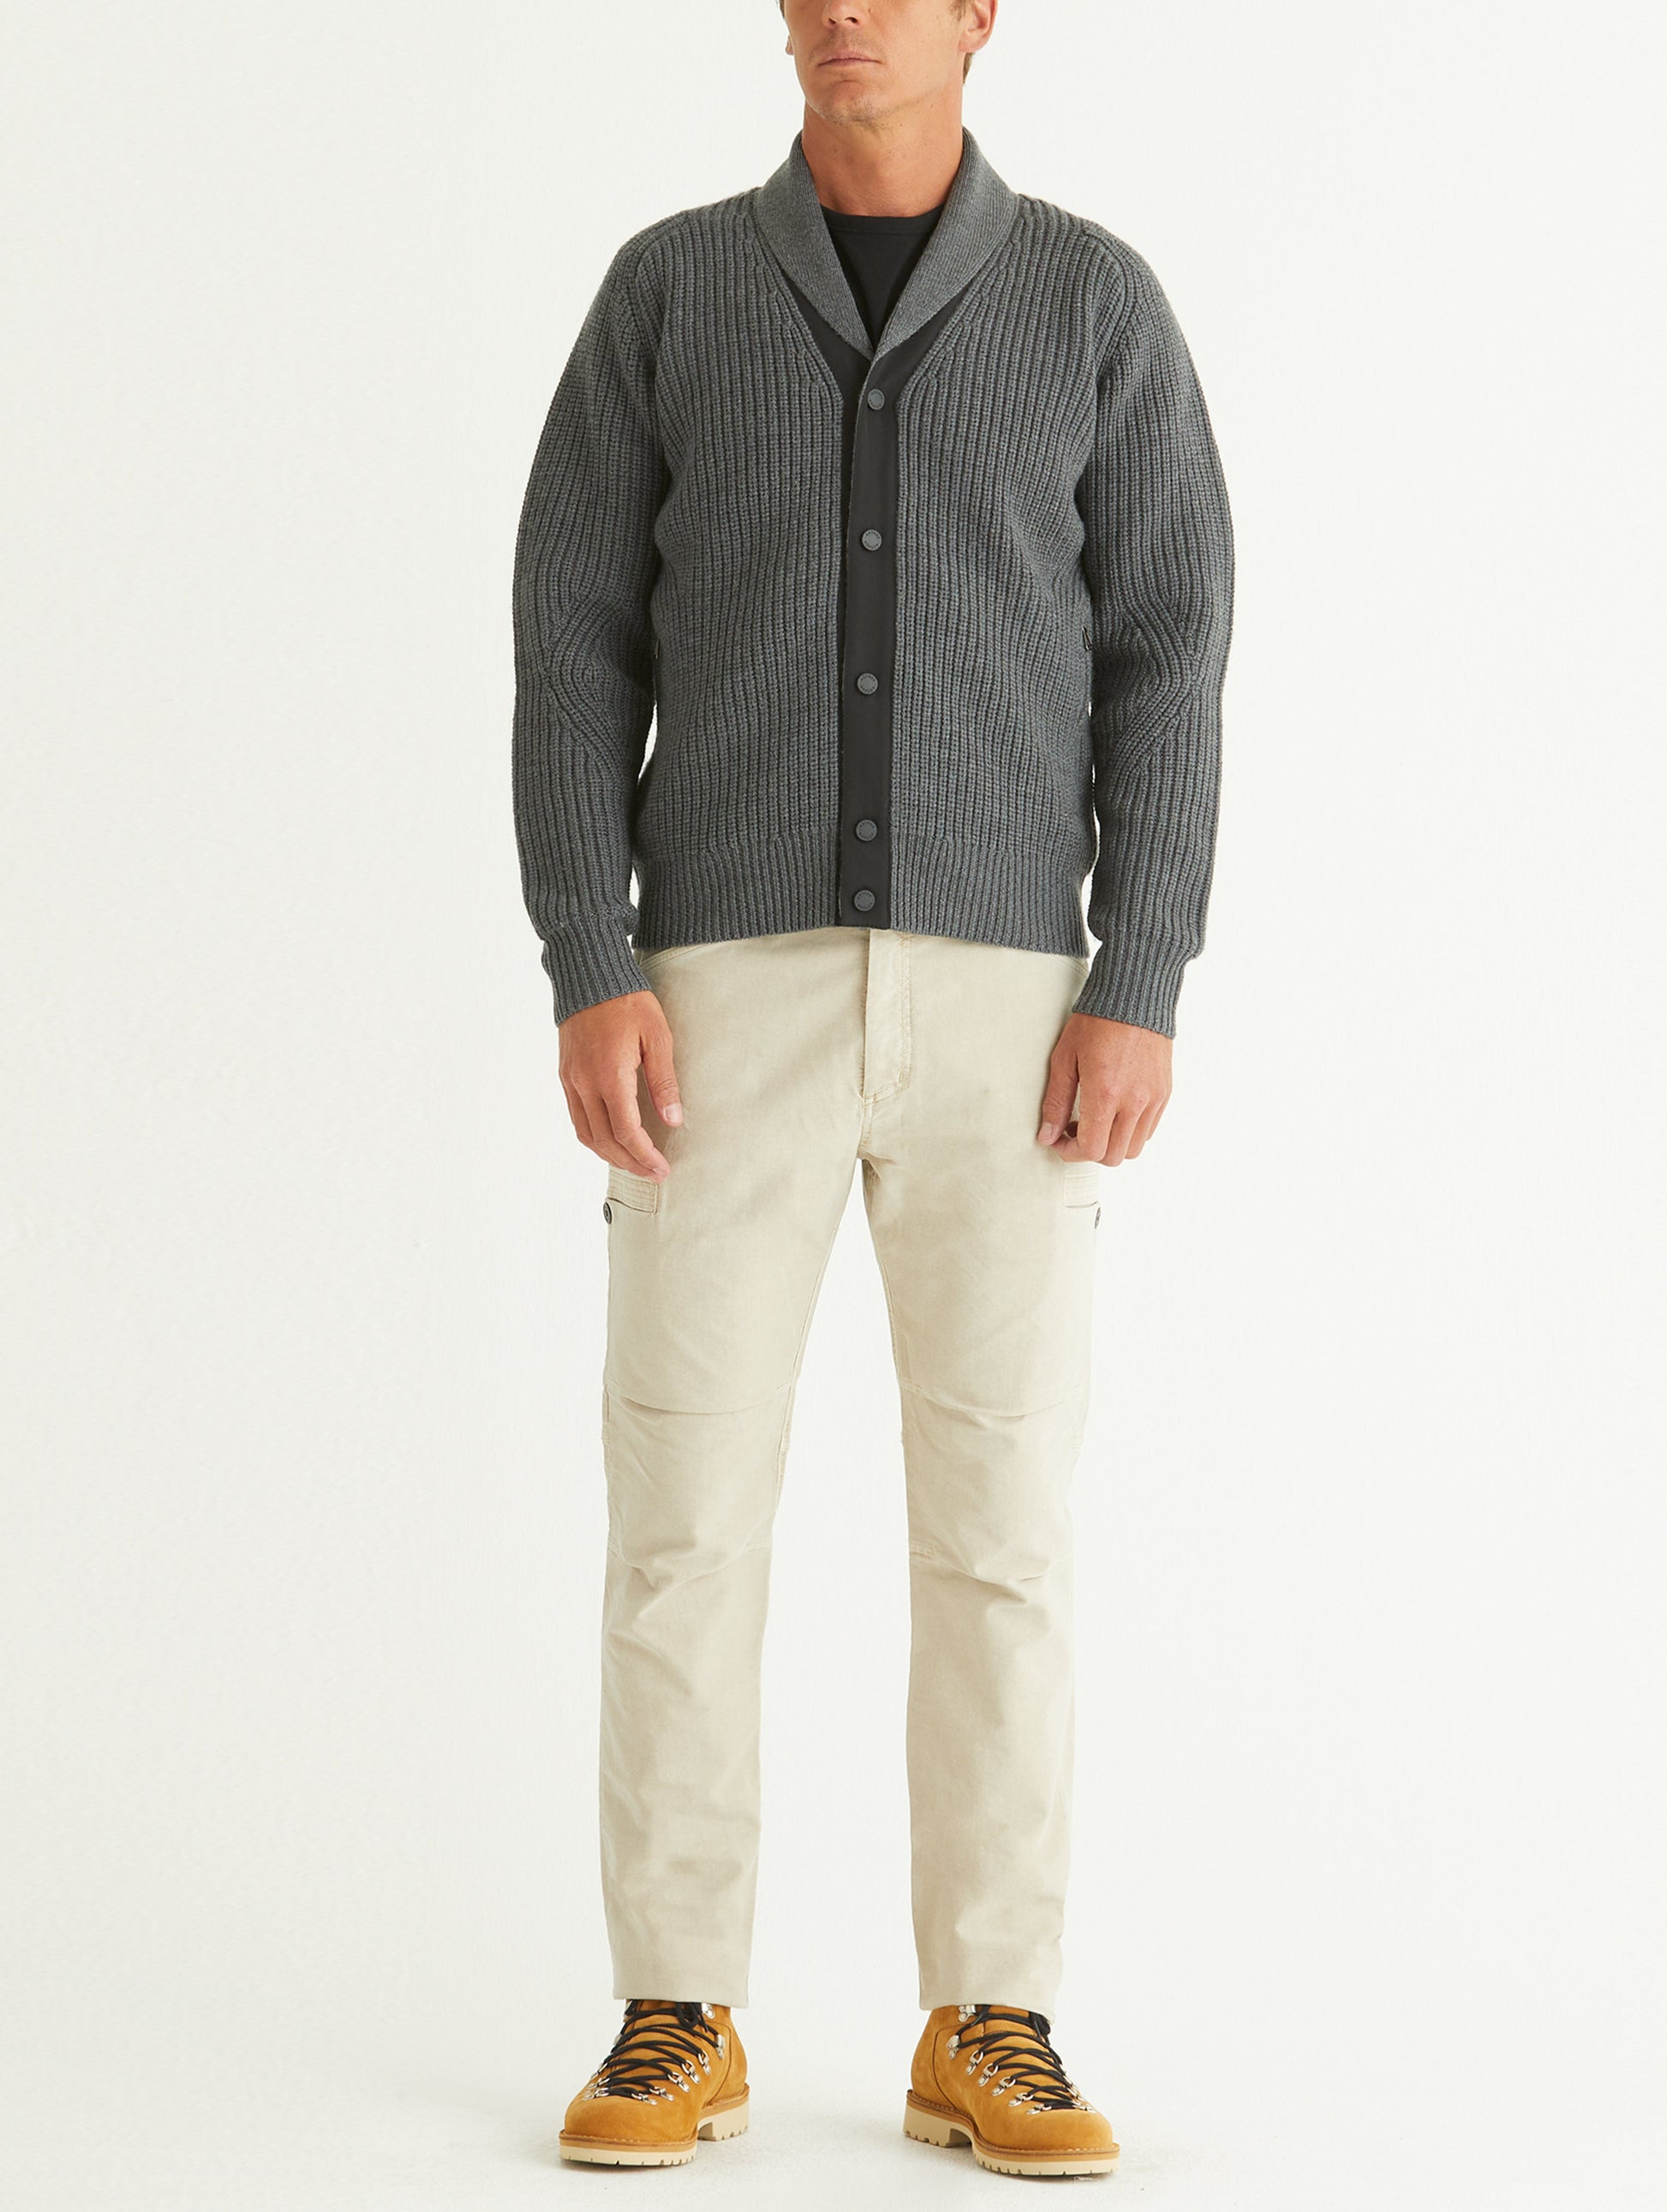 cardigan for men from Aether Apparel